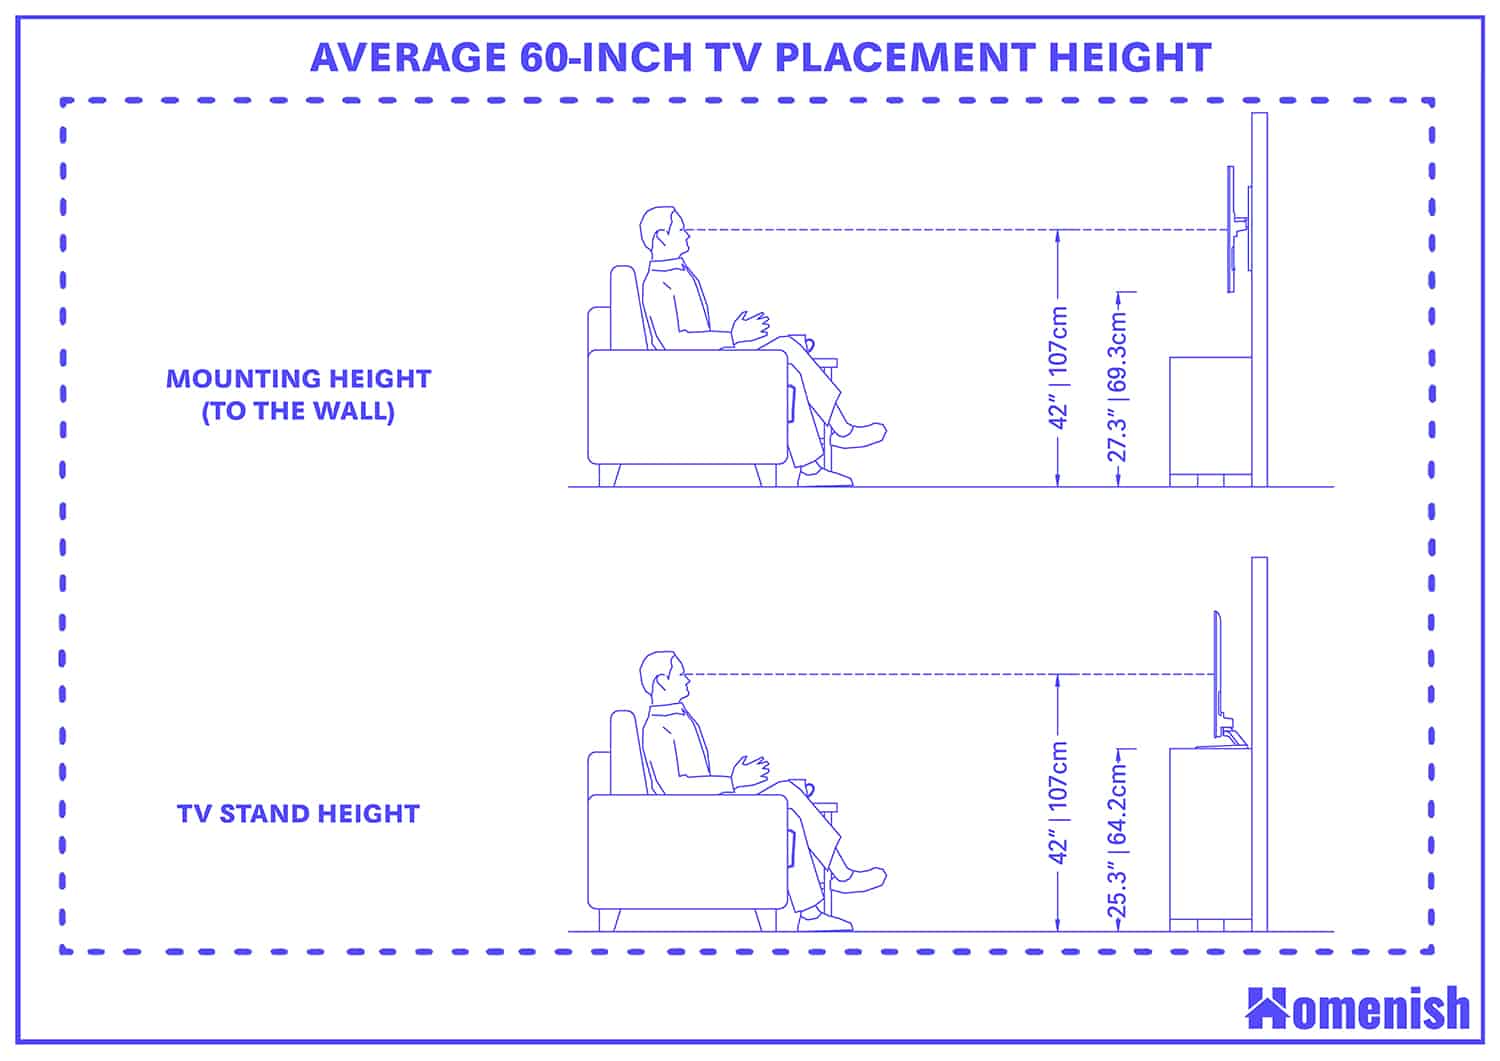 Average 60-Inch TV Placement Height